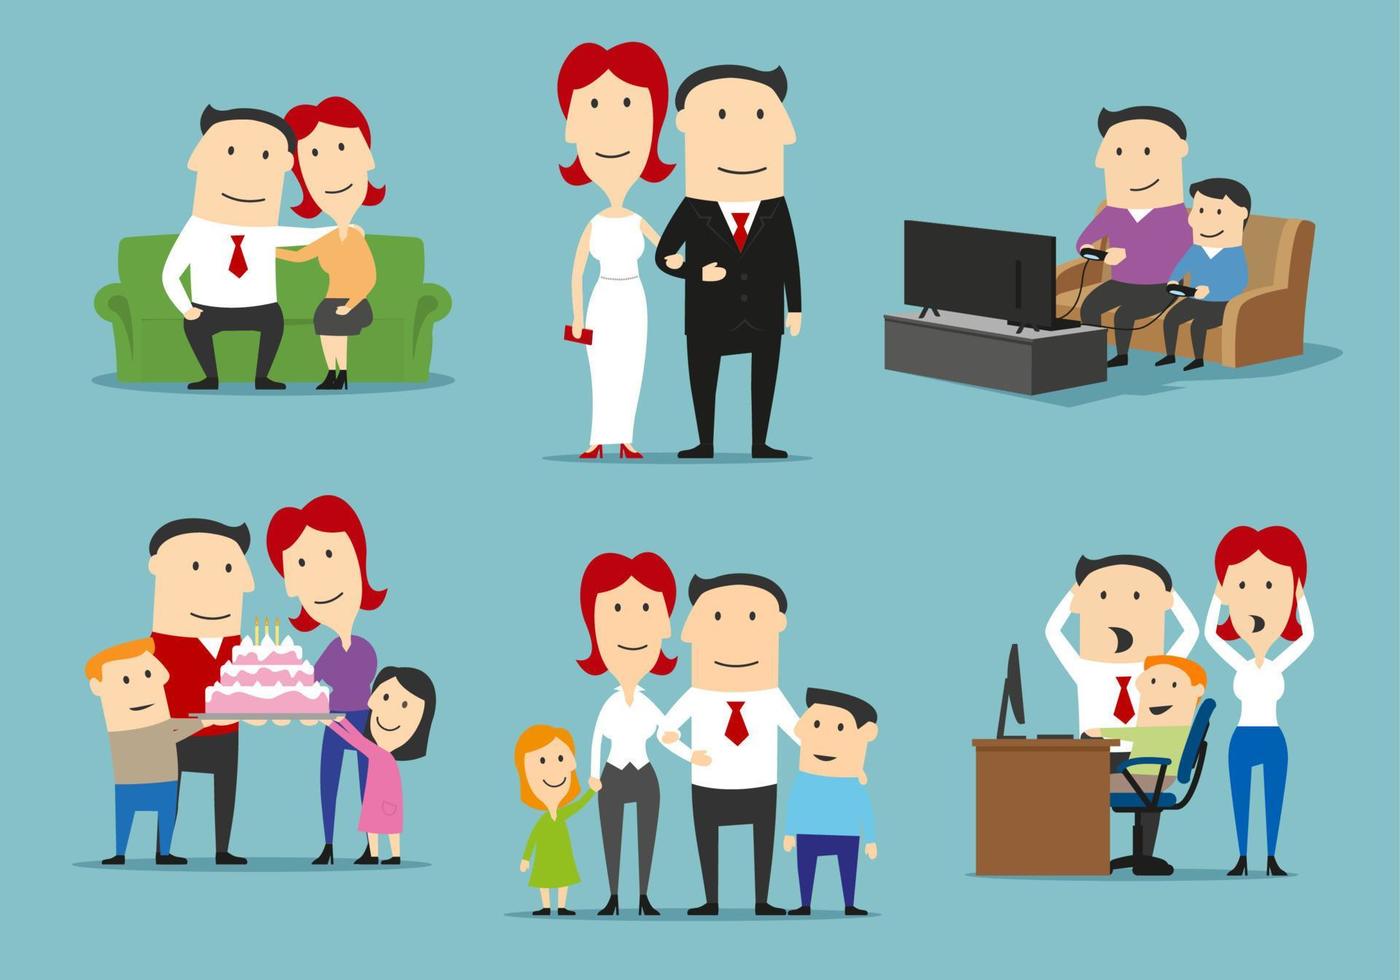 Family in different life stages cartoon set vector